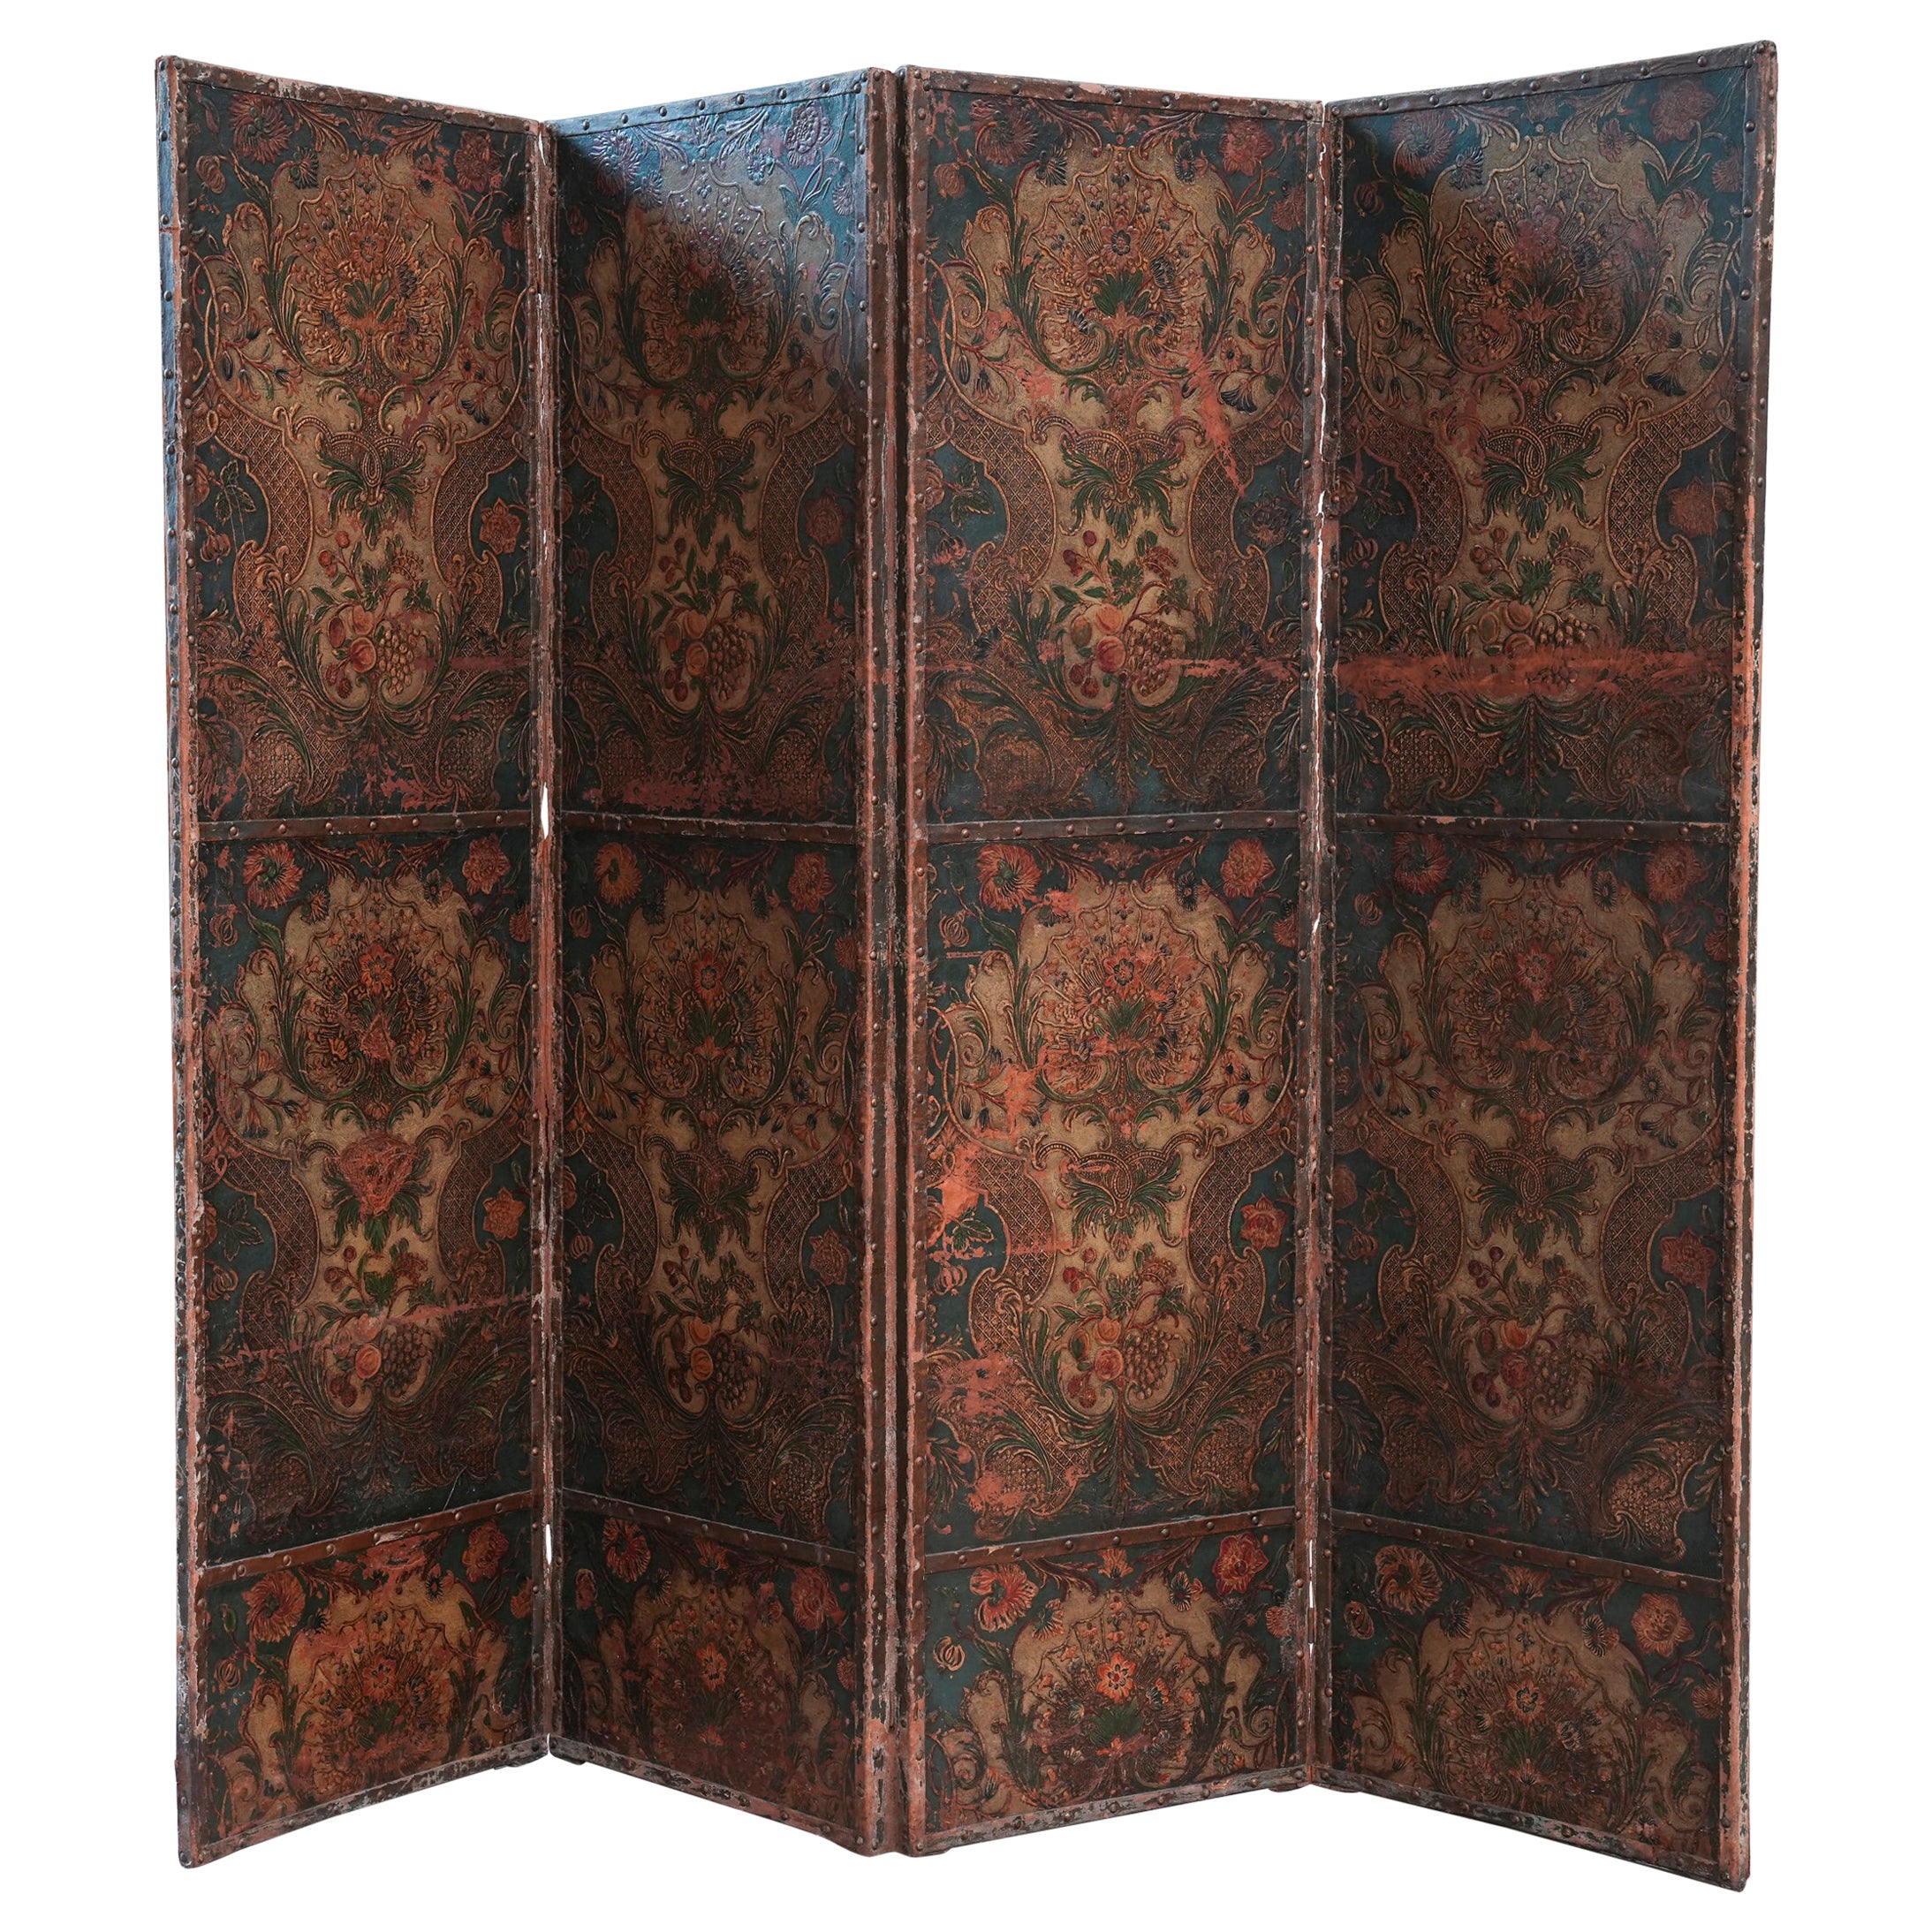 19th Century Embossed & Decorated Leather Room Screen